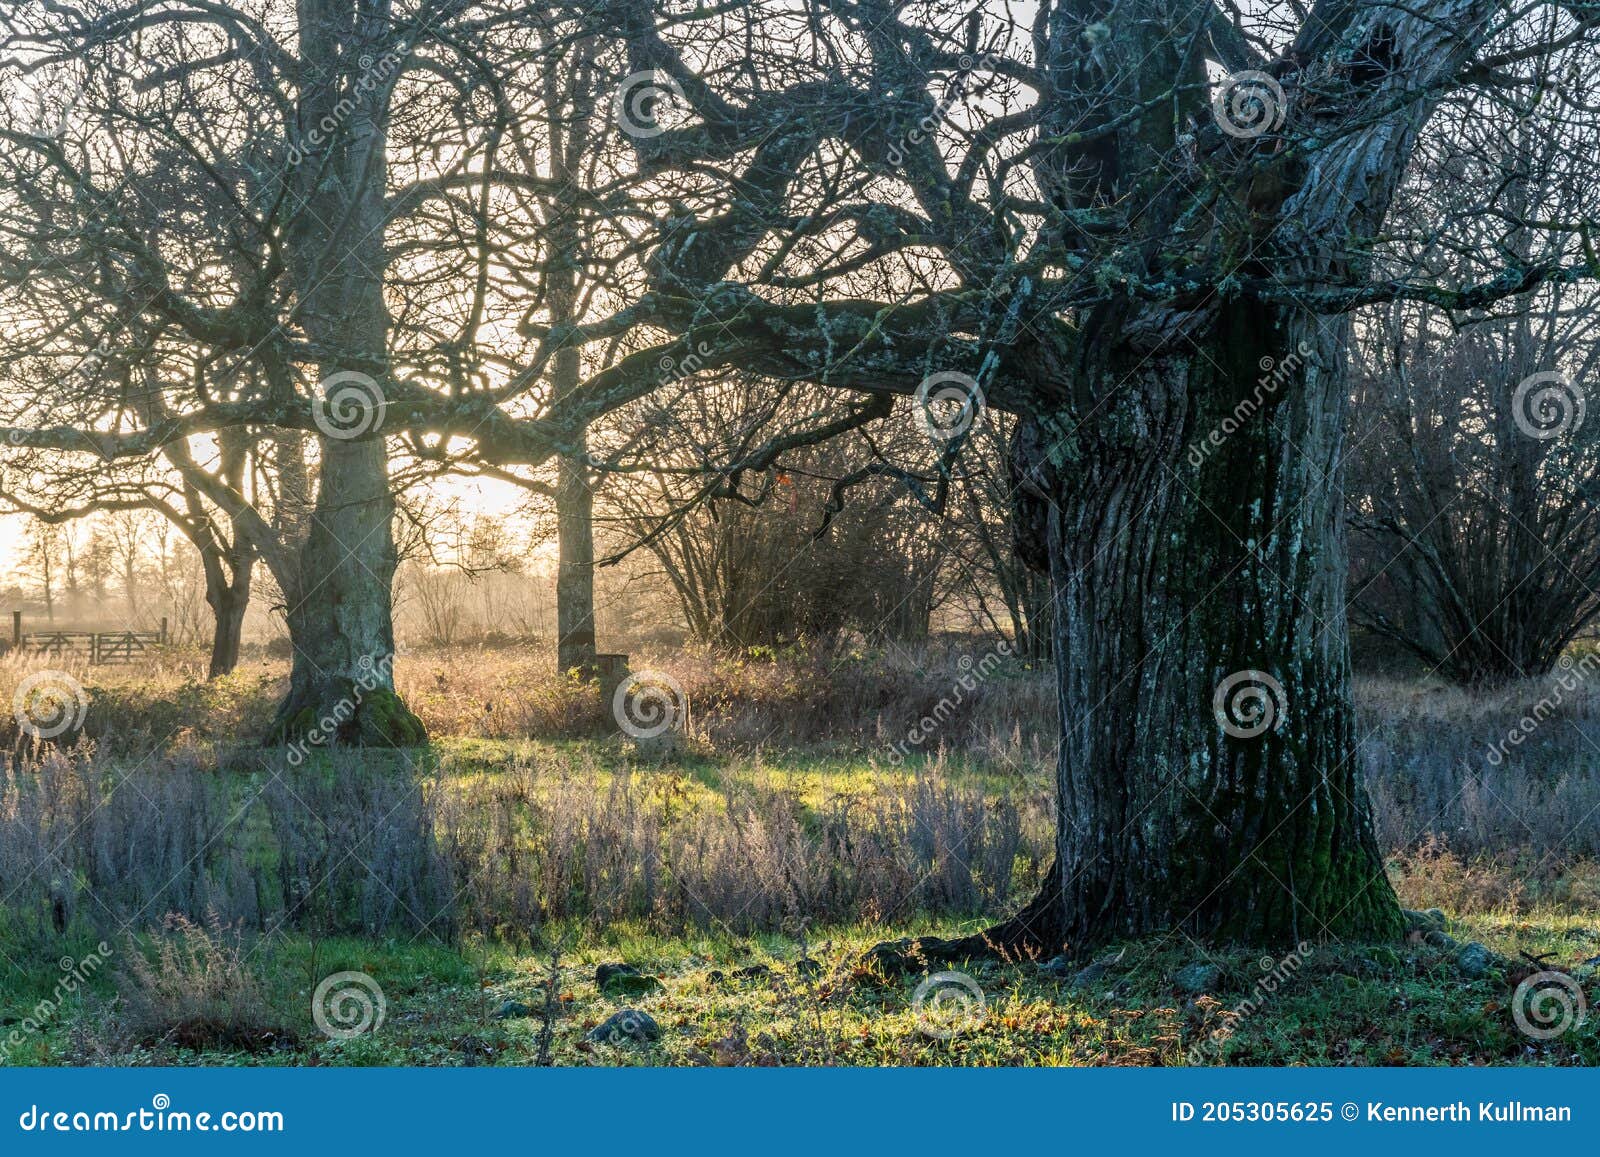 sunset in a nature reserve with big oak trees